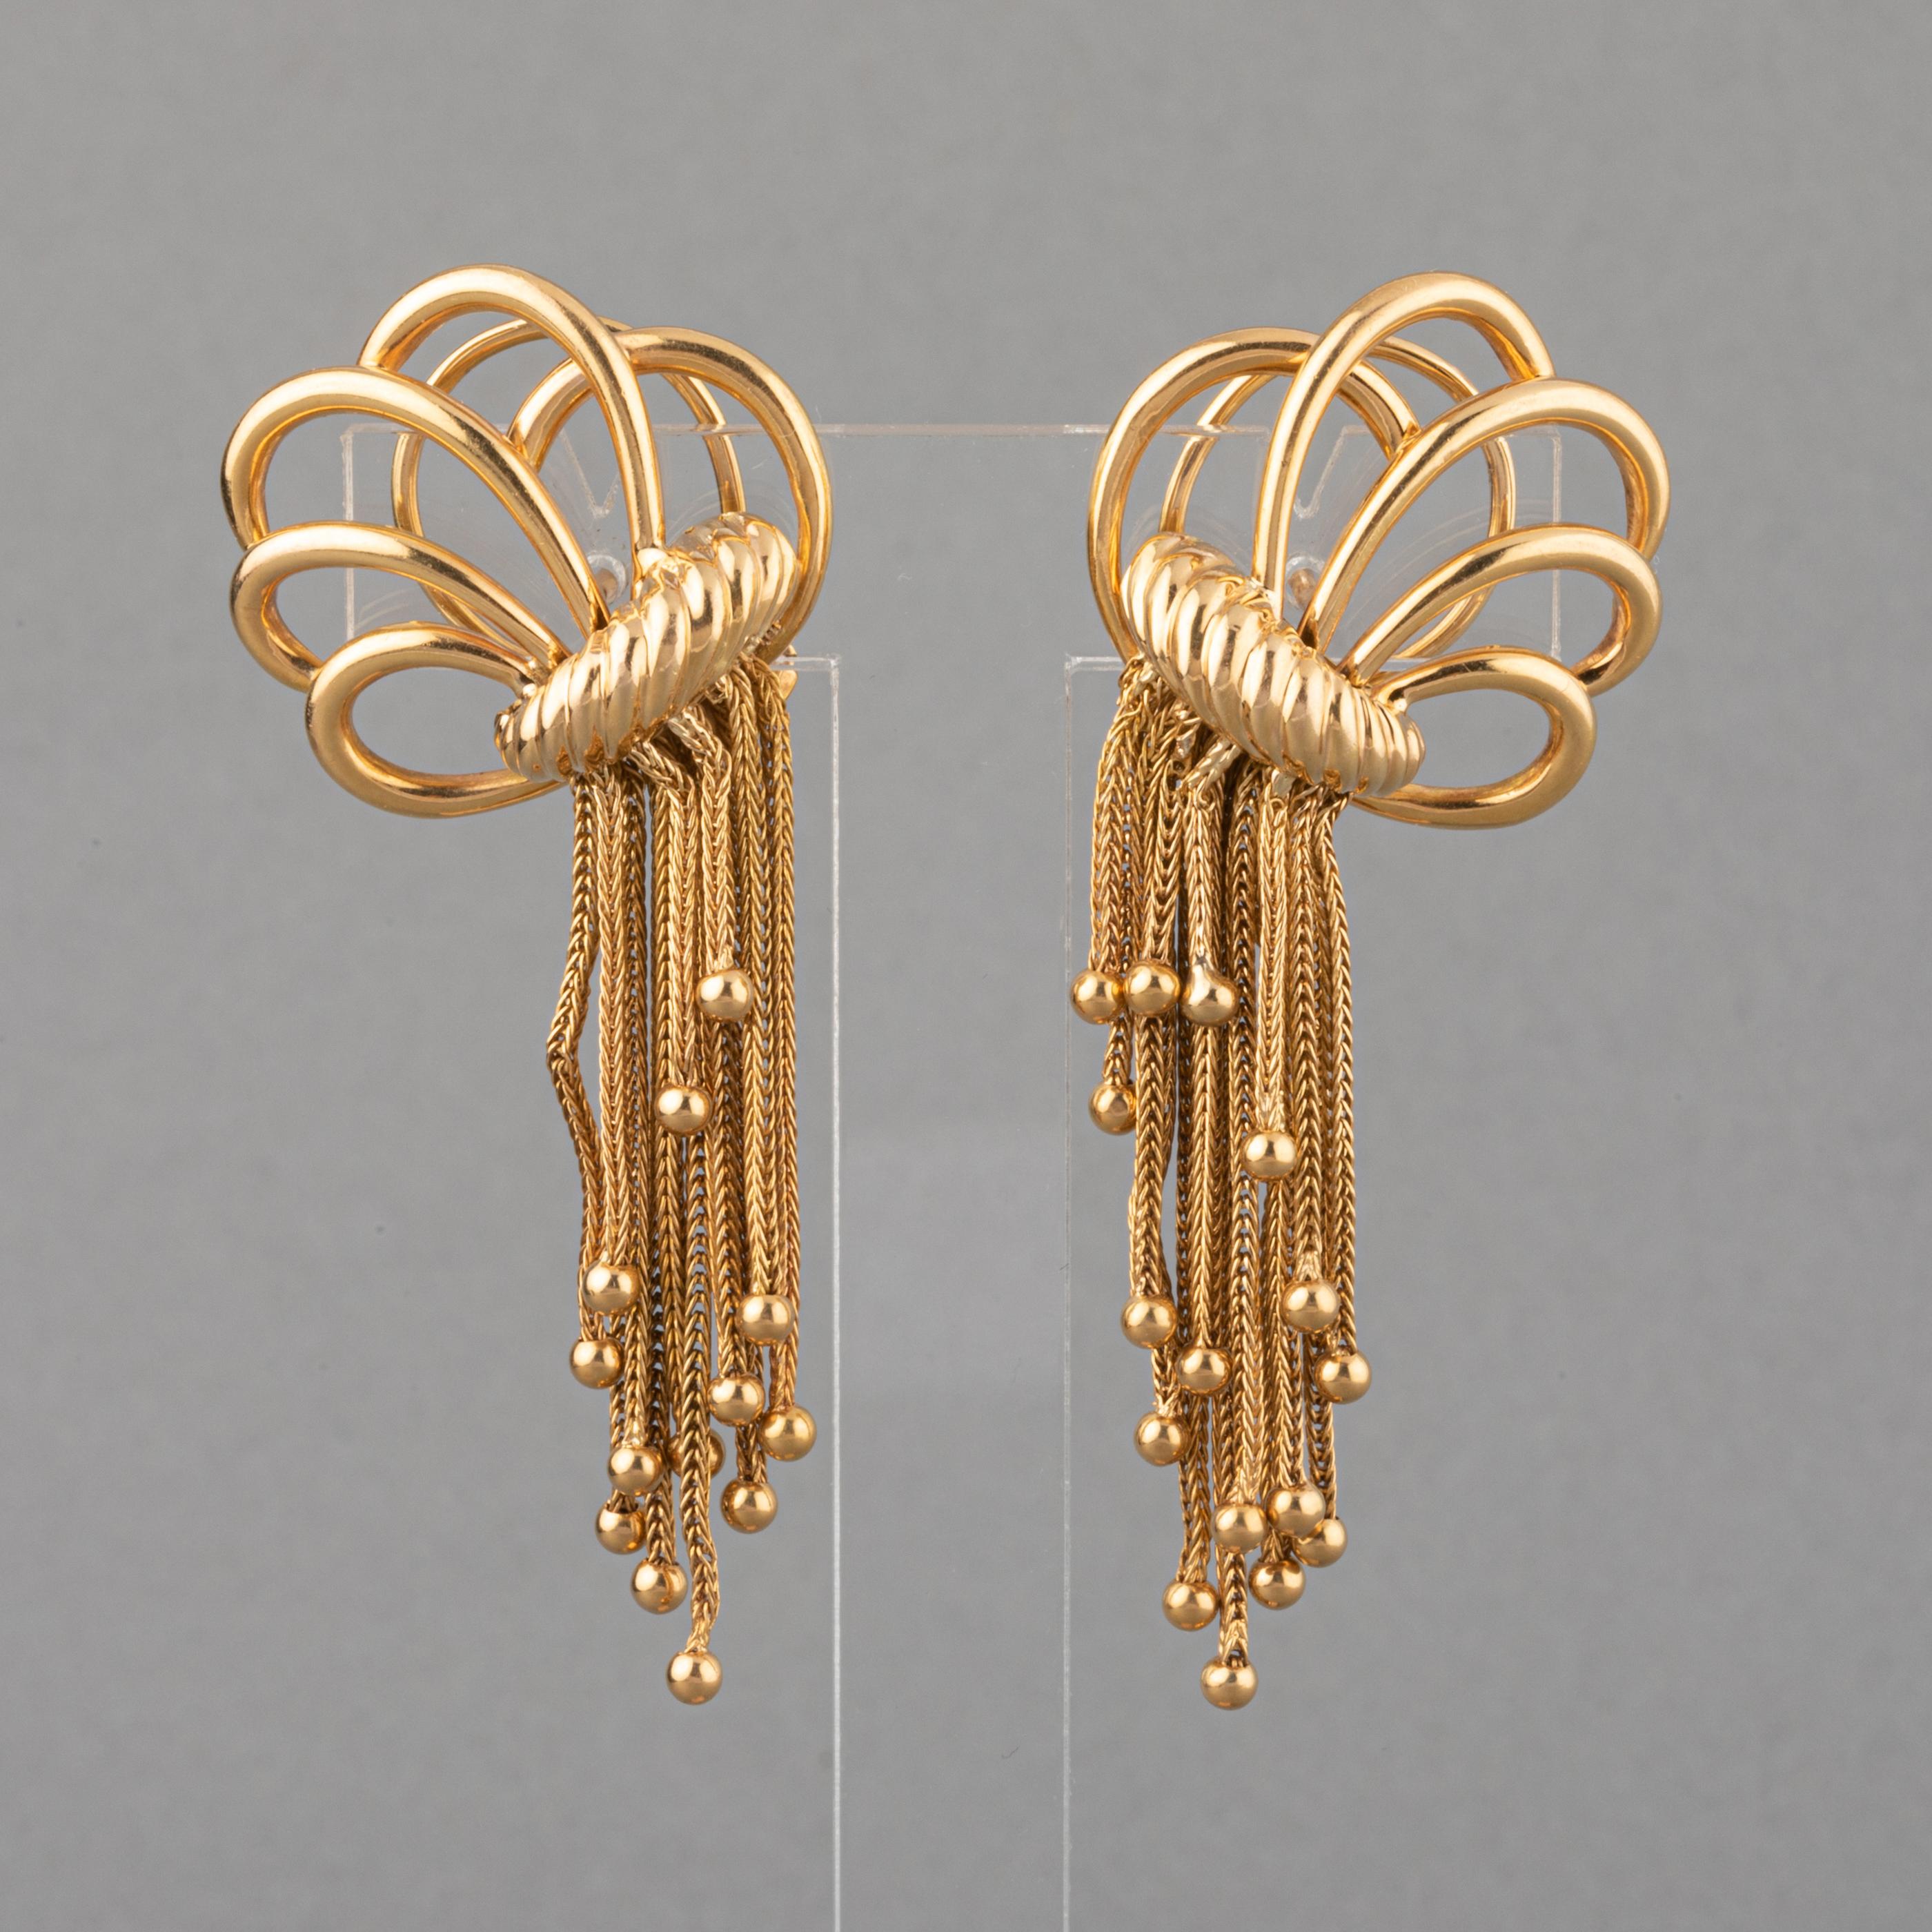 Beautiful pair of earrings, made in France circa 1950.
Made in yellow gold 18K. Two eagle head marks.
Dimensions: 6.2 cm height, 2.5 cm width
Total weight 21.70 grams. 
Clip and pierce system.